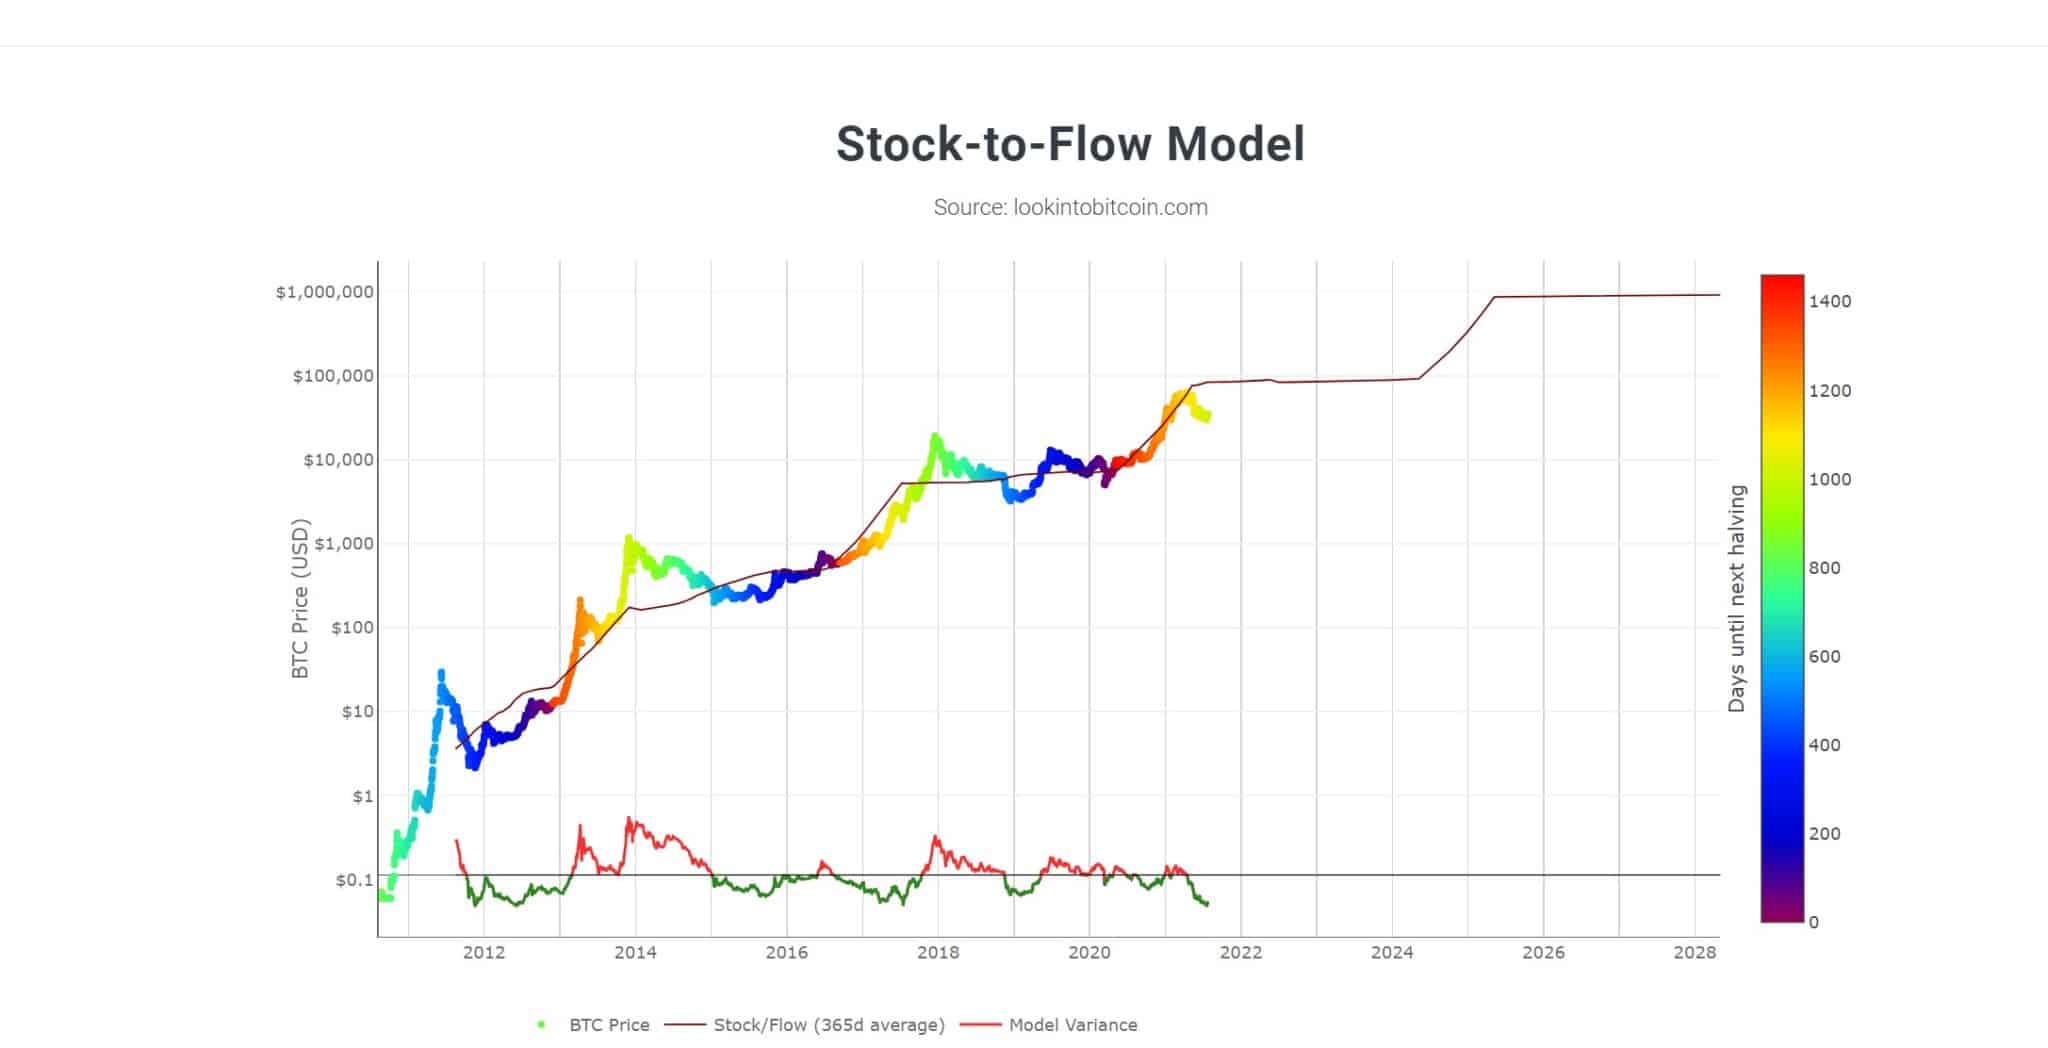 stock to flow model from 2012 to 2028